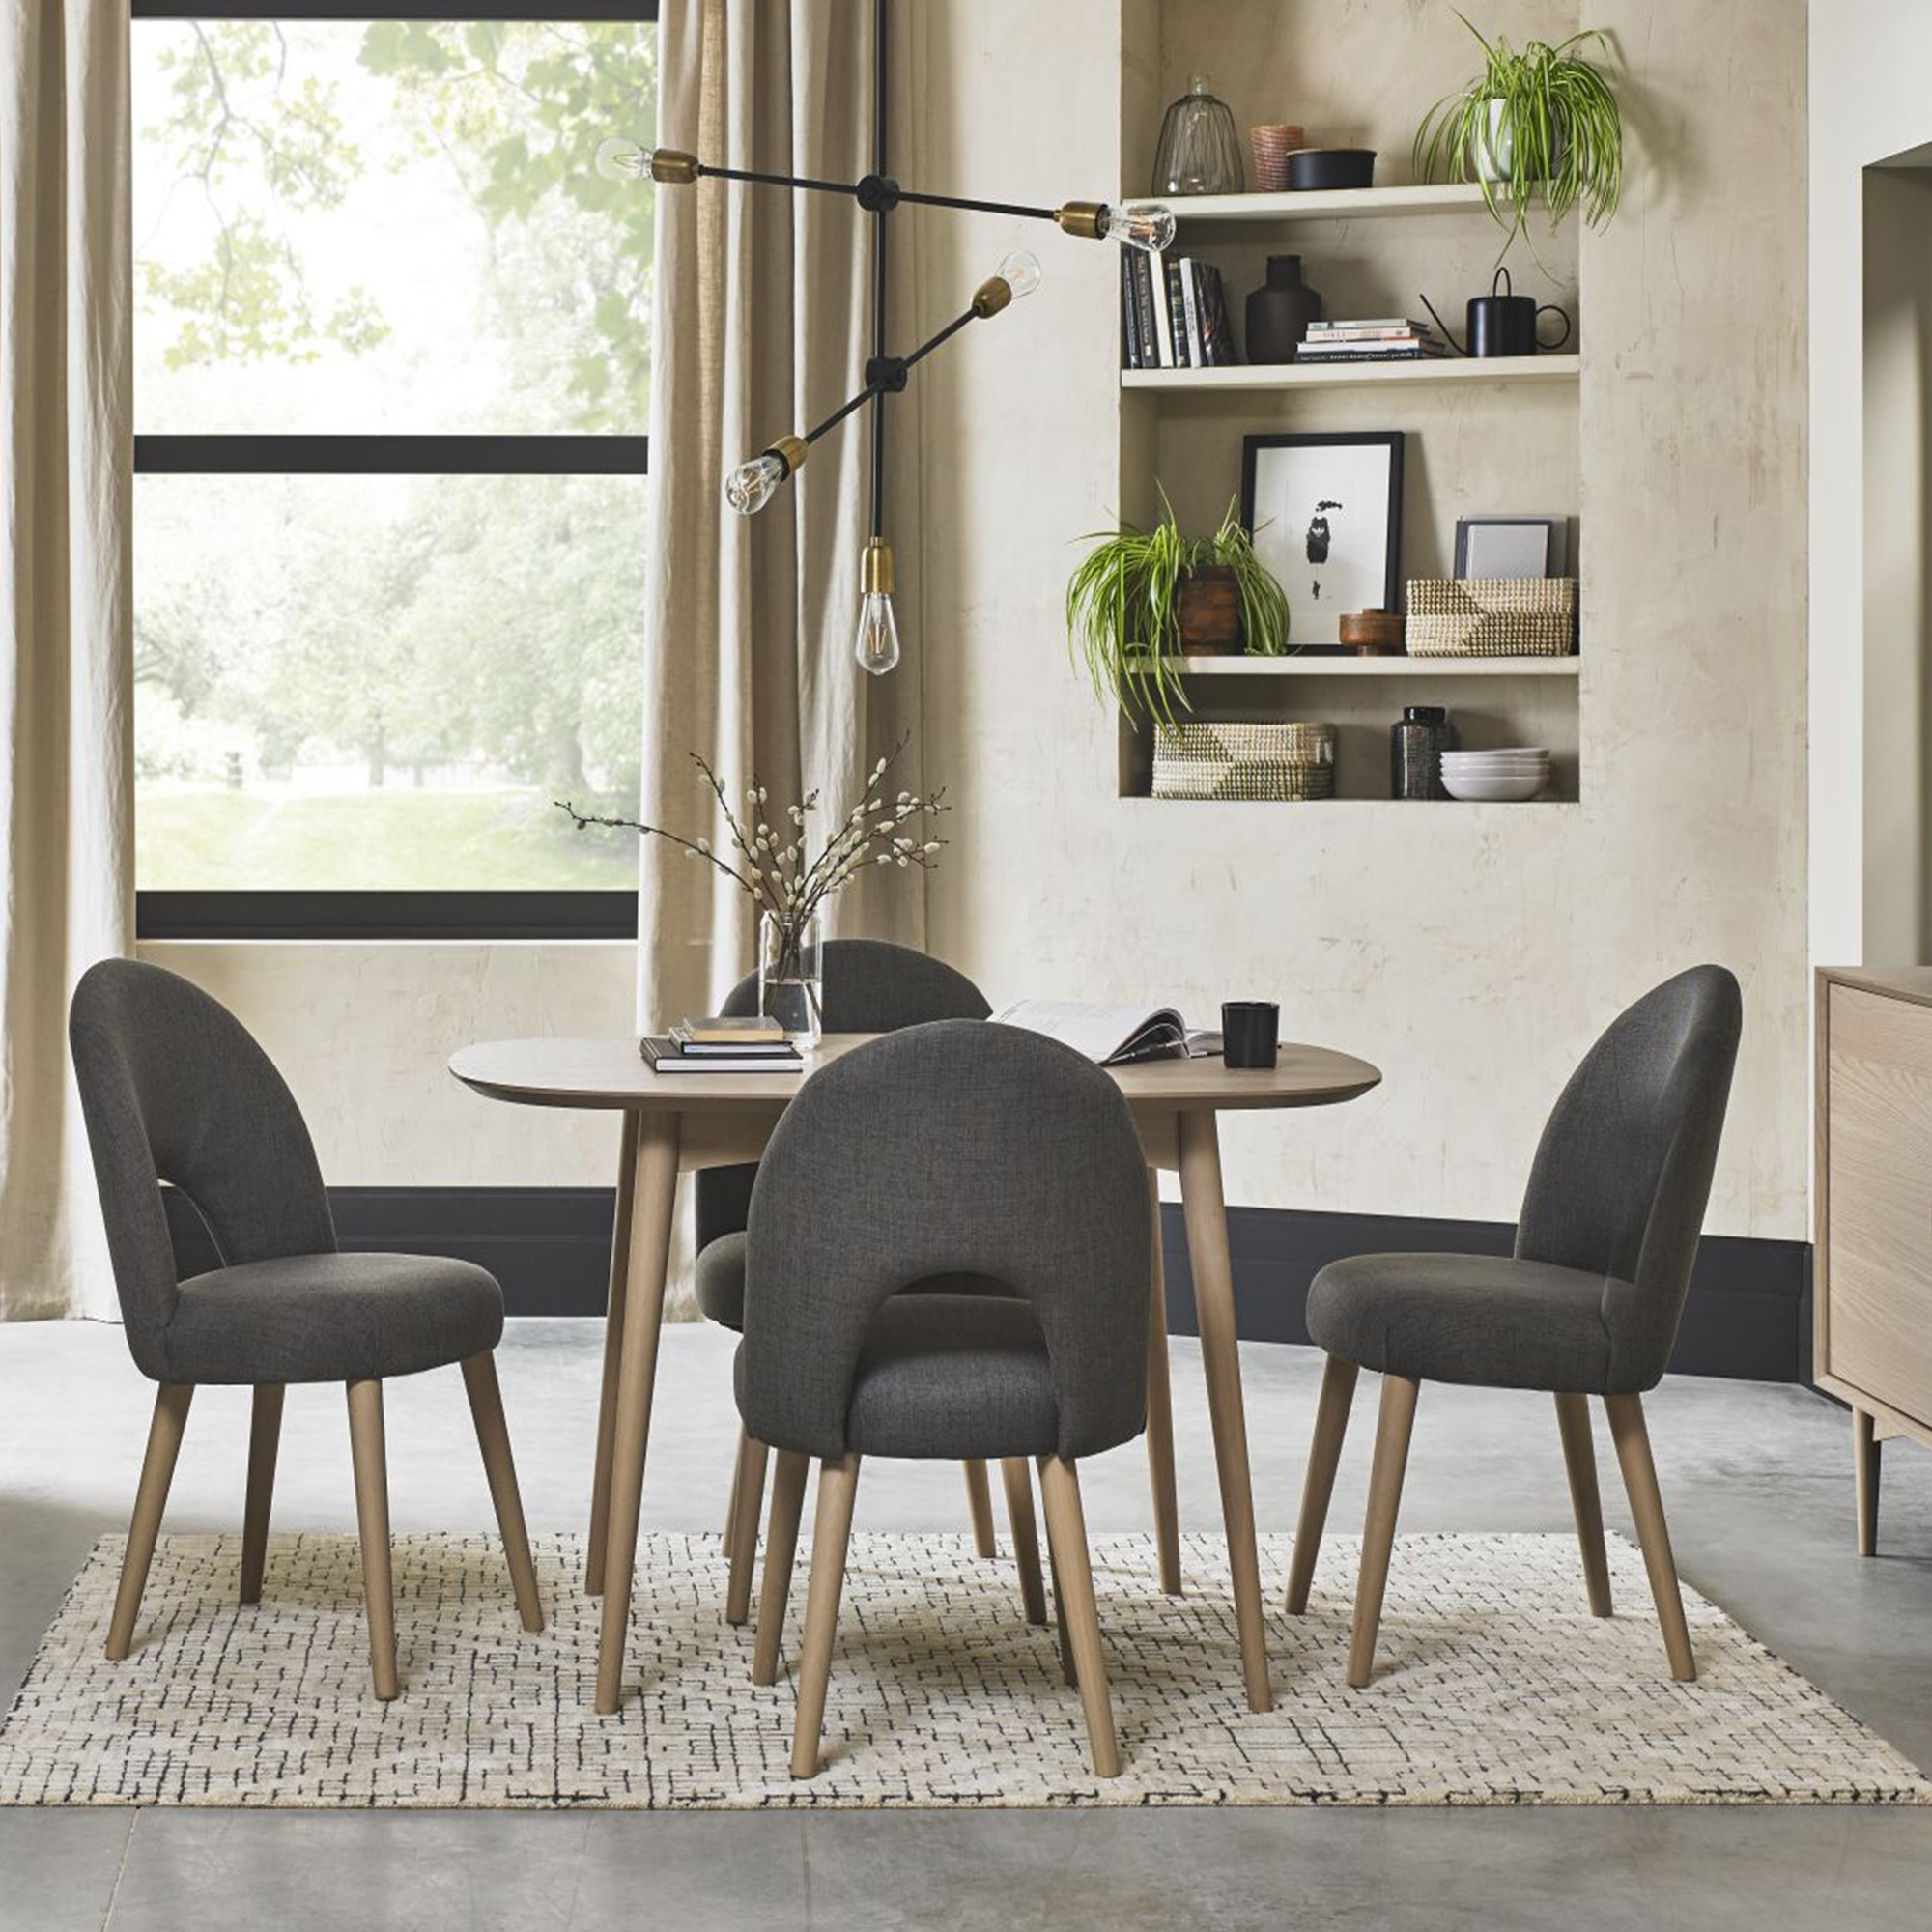 Fino Scandi Oak Dining Table 4 Chairs, Oak Dining Room Chairs Set Of 4